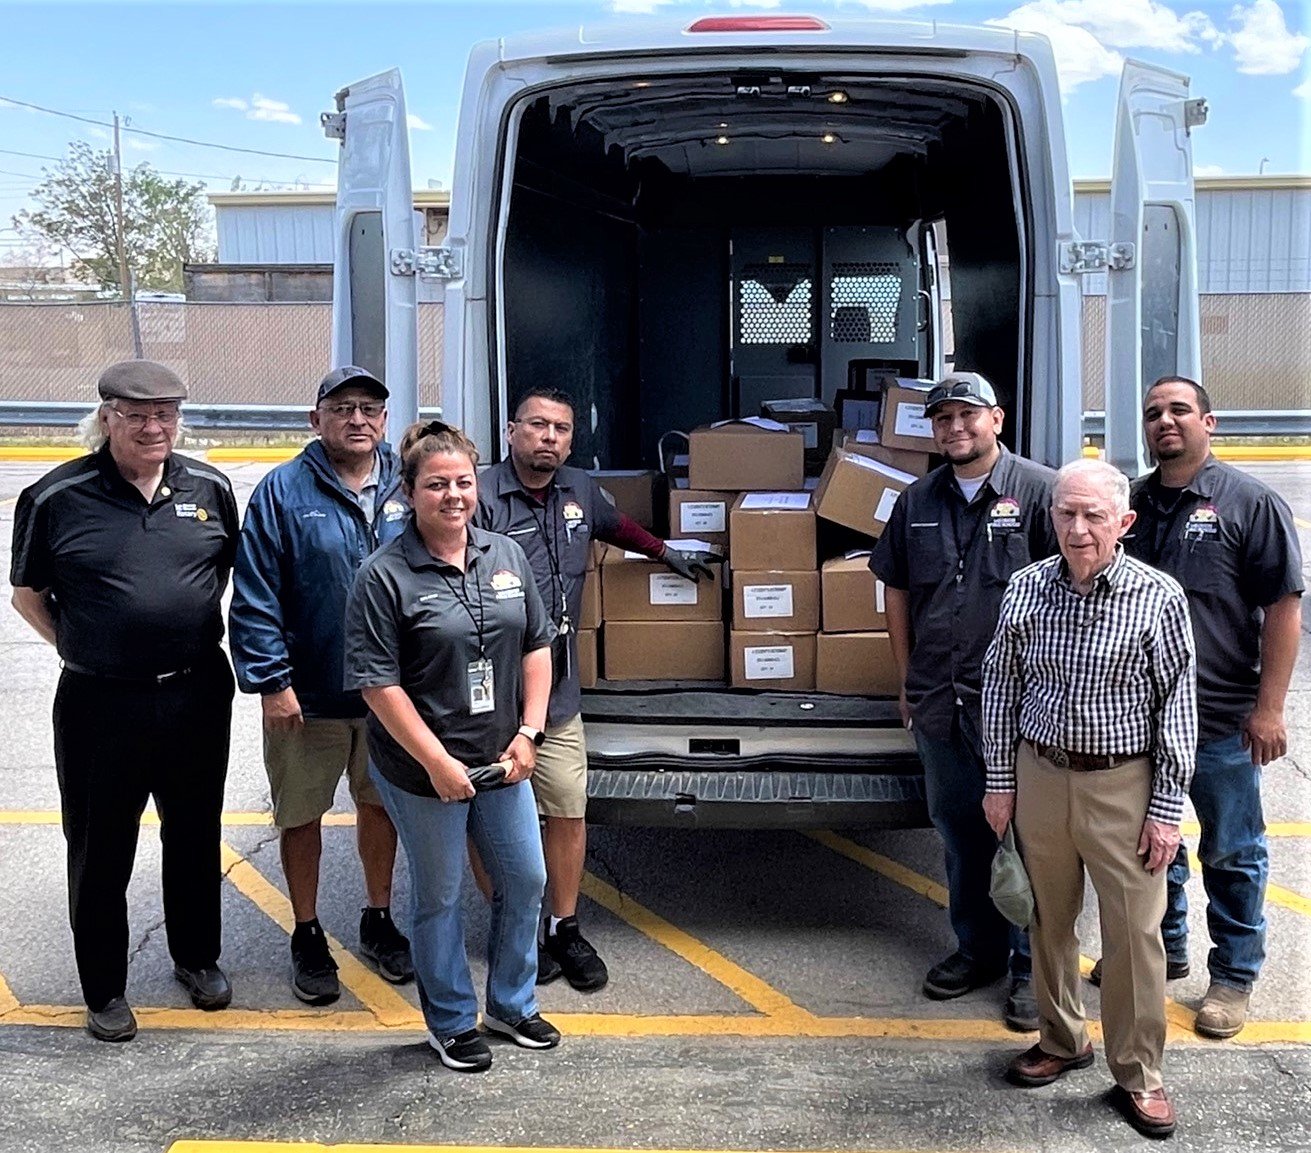 Gene Gant, far left, and Rob Shelton, in the front at right, of the Rio Grande Rotary Club with Las Cruces Public Schools Materials Management team, left to right, Johnny Robles, Veronica Lopez, Michael Gay, Dominic Maldonado and Albert Lucero as they begin delivery of nearly 1,800 dictionaries donated by the club to third graders in 26 elementary schools in the district.